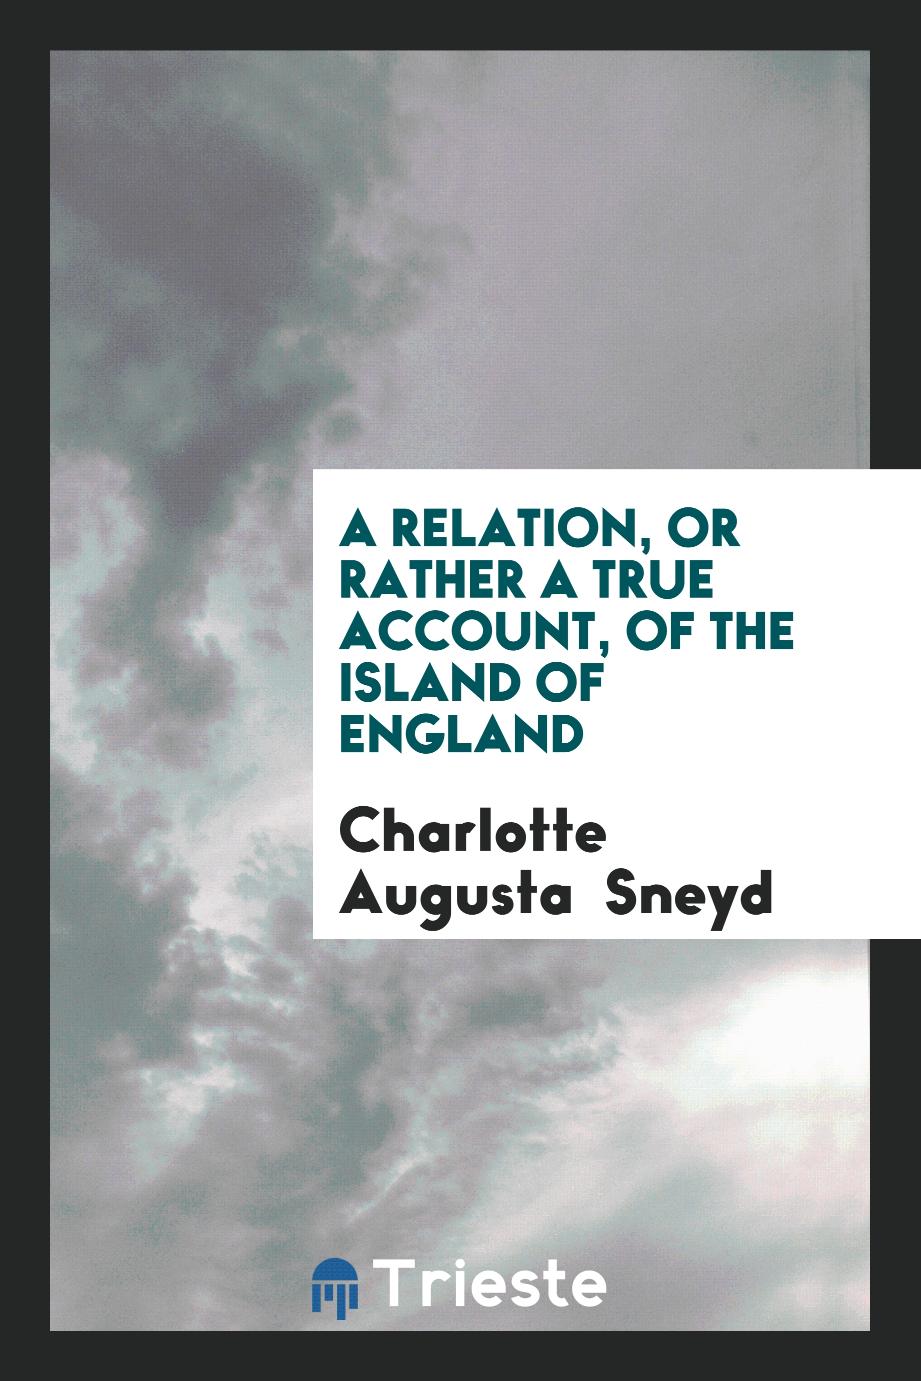 A Relation, or Rather a True Account, of the Island of England